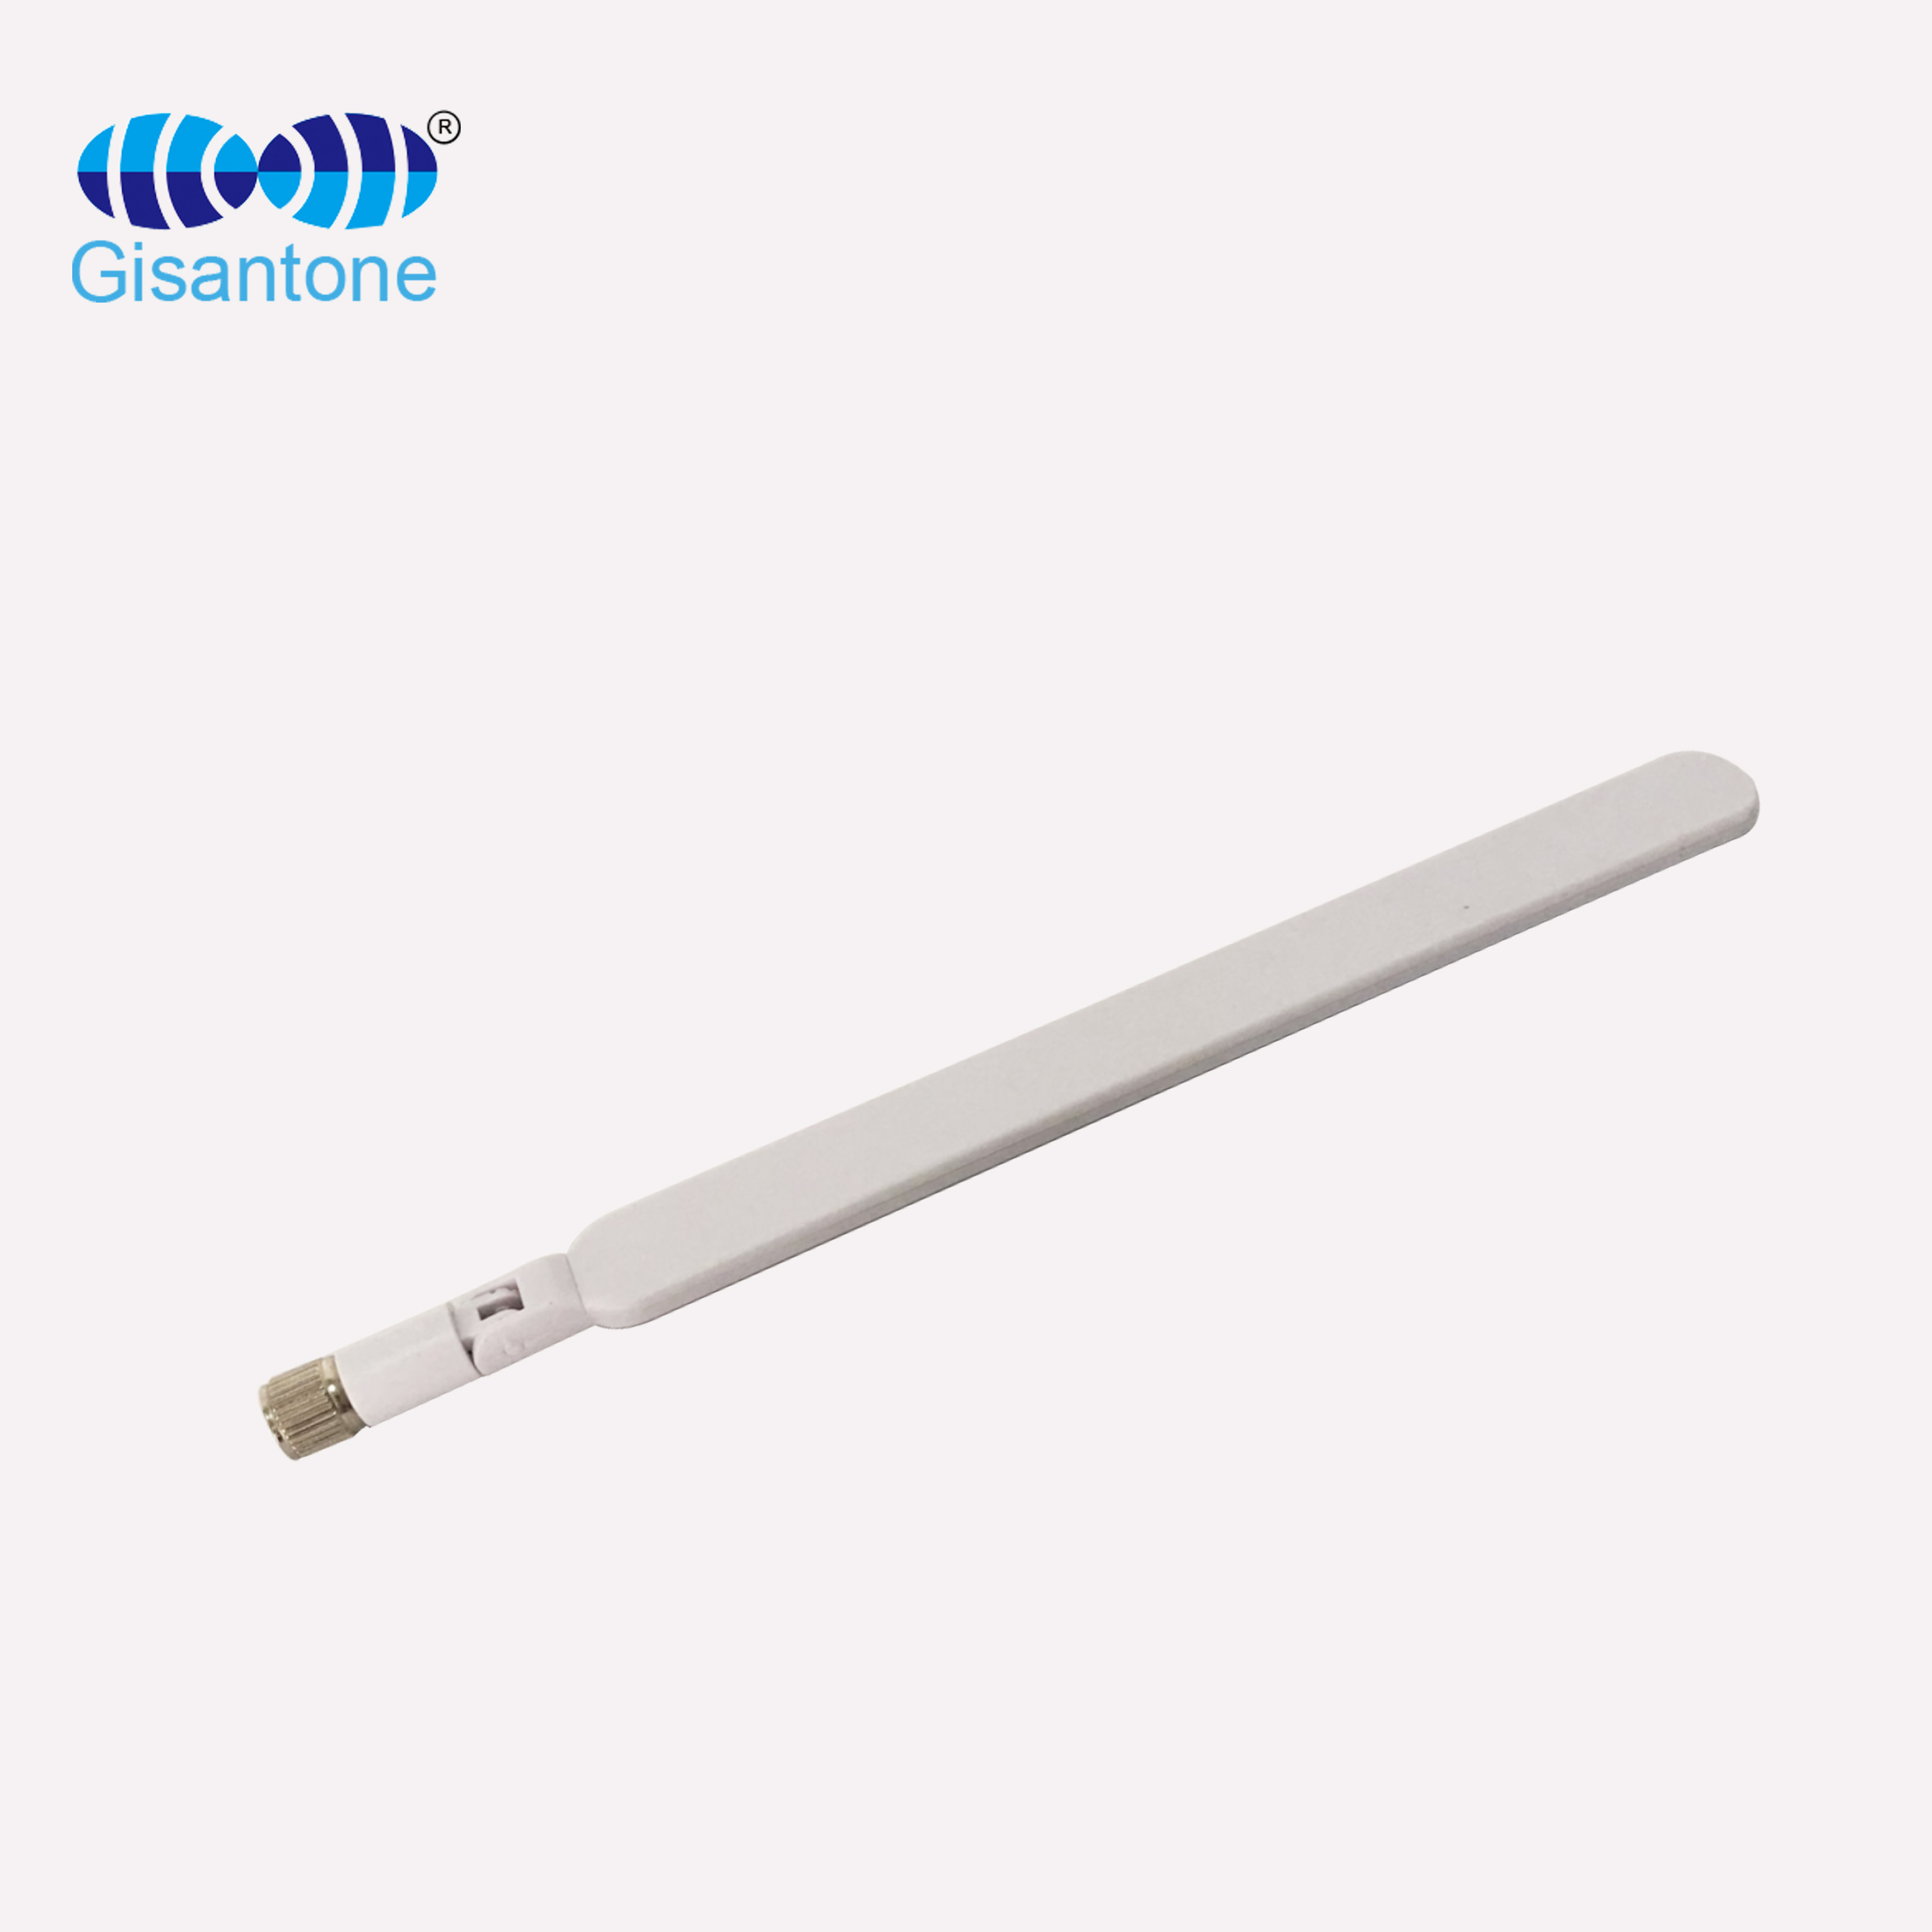 4G huawei router rubber antenna